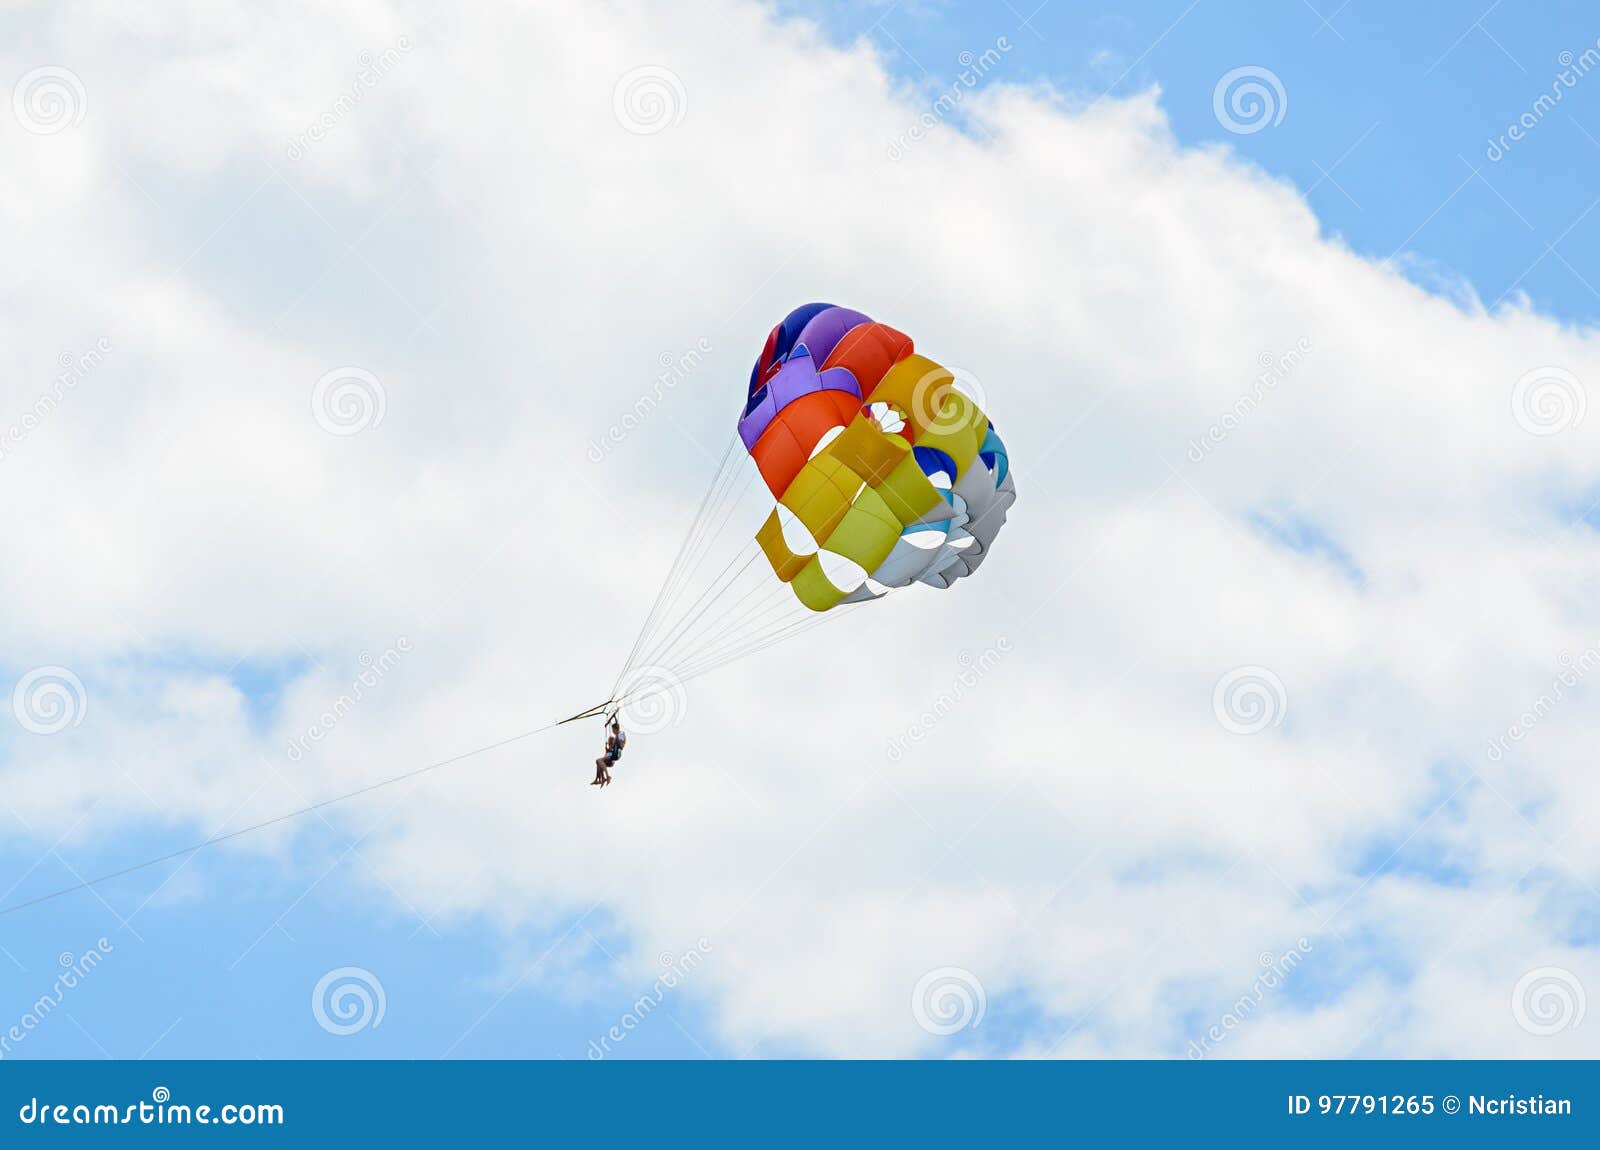 colored parasail wing in the blue clouds sky, parasailing